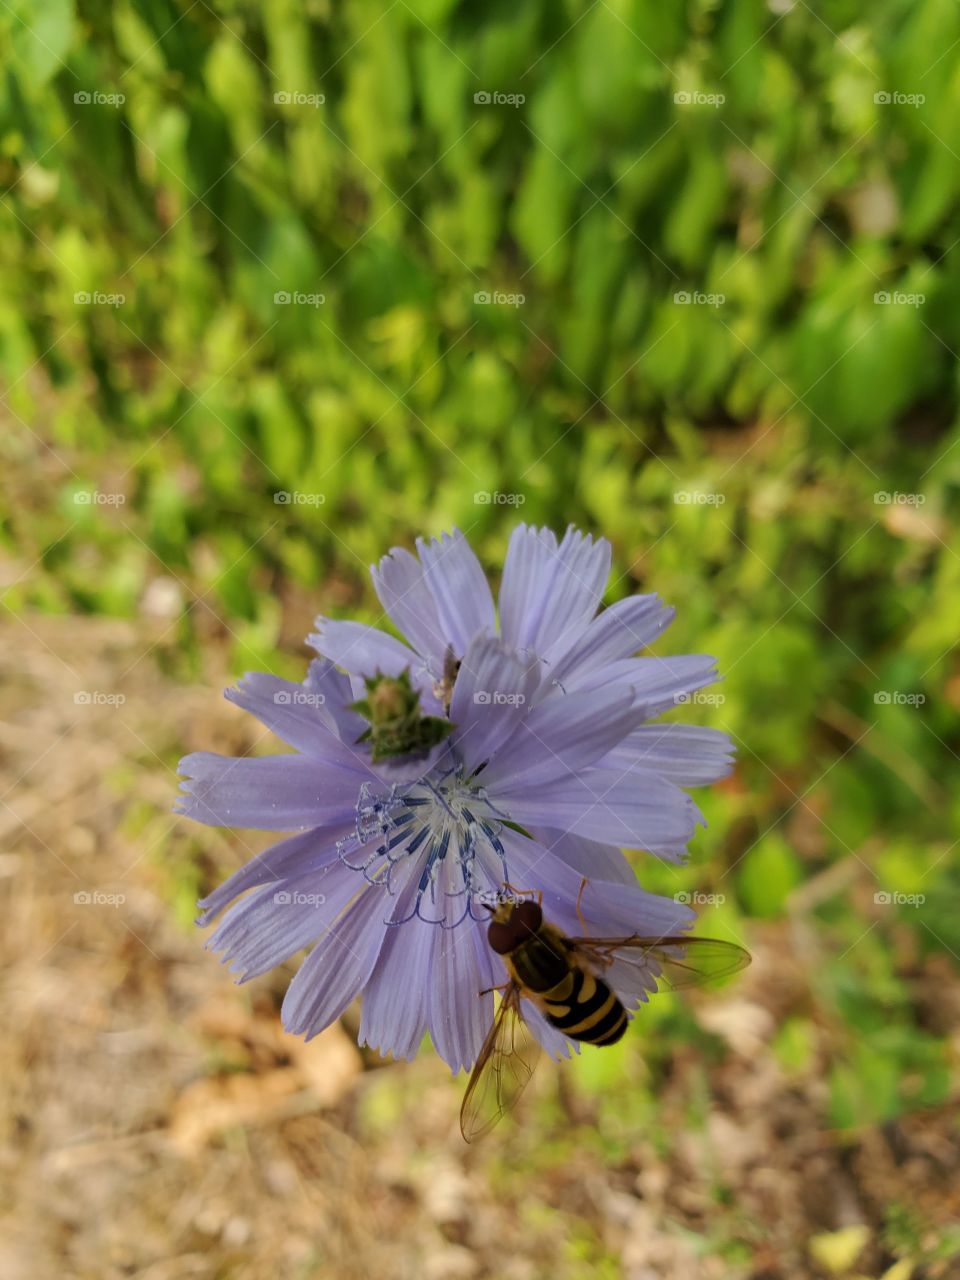 Bees are working hard